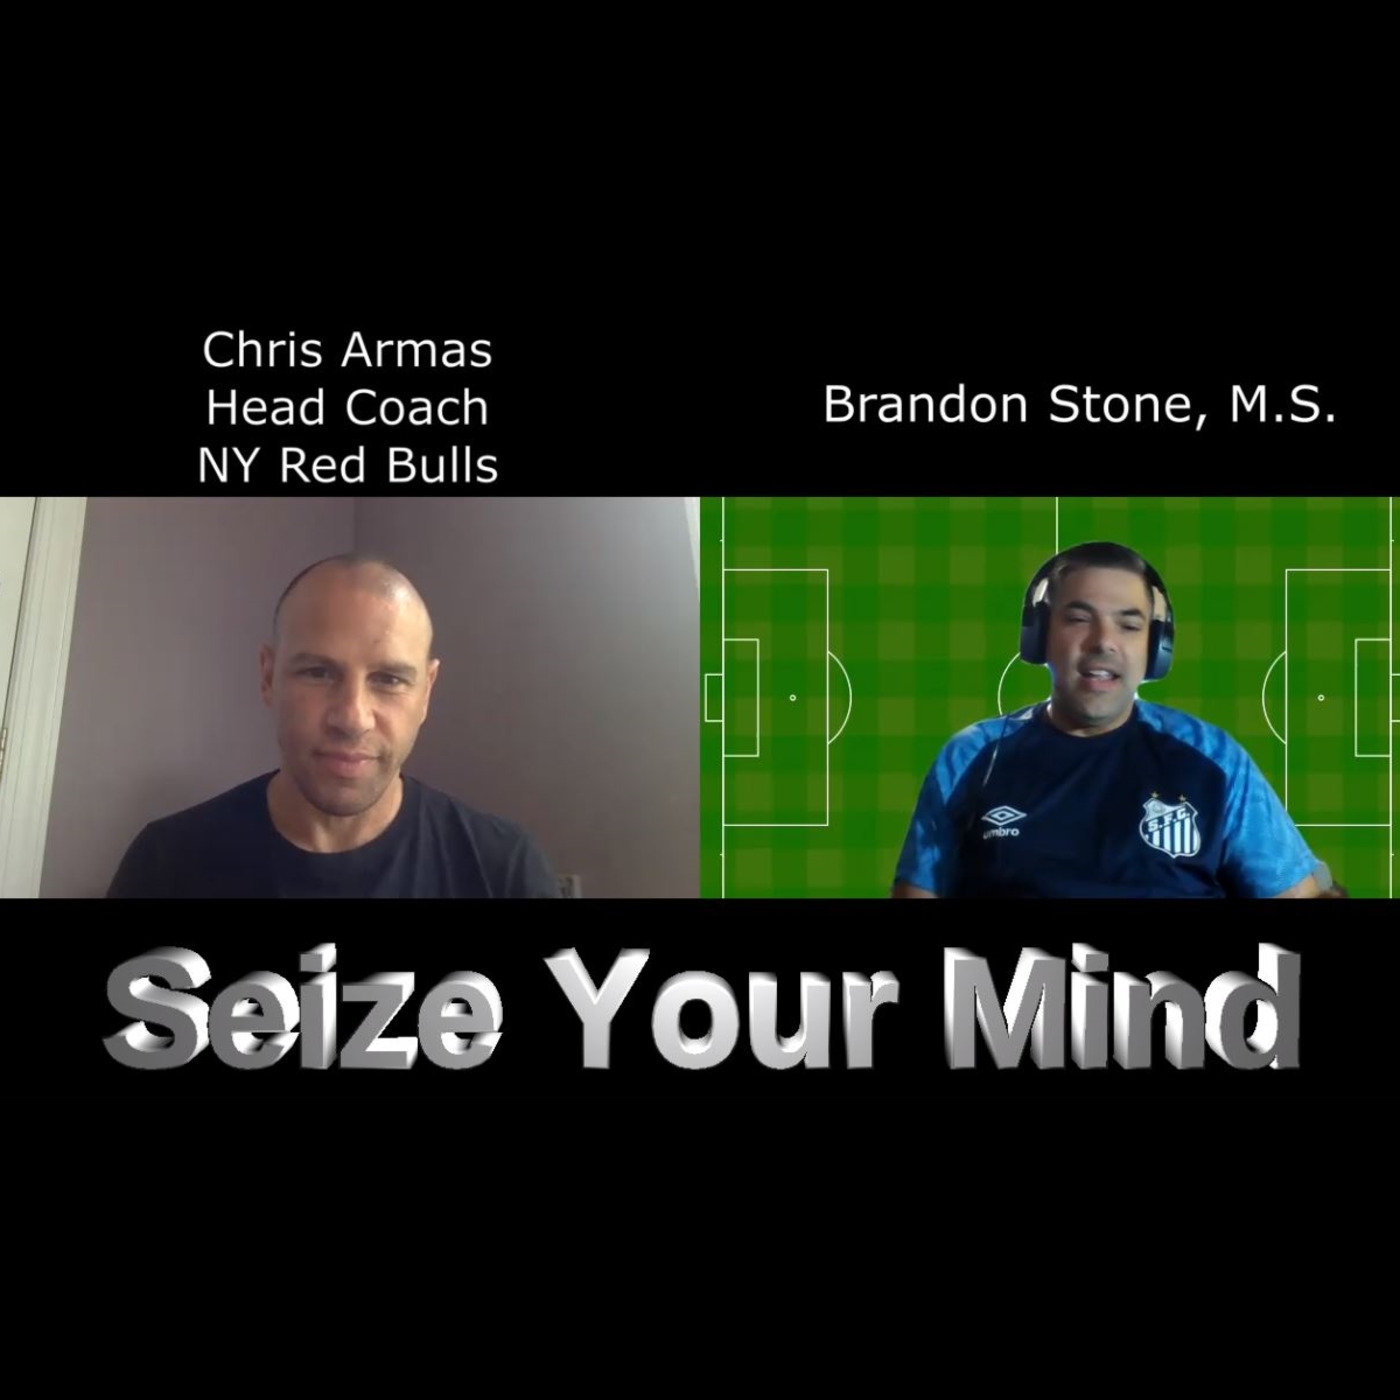 Seize Your Mind Podcast #17 Chris Armas  the Head Coach of the NY Red Bulls and Host Brandon Stone